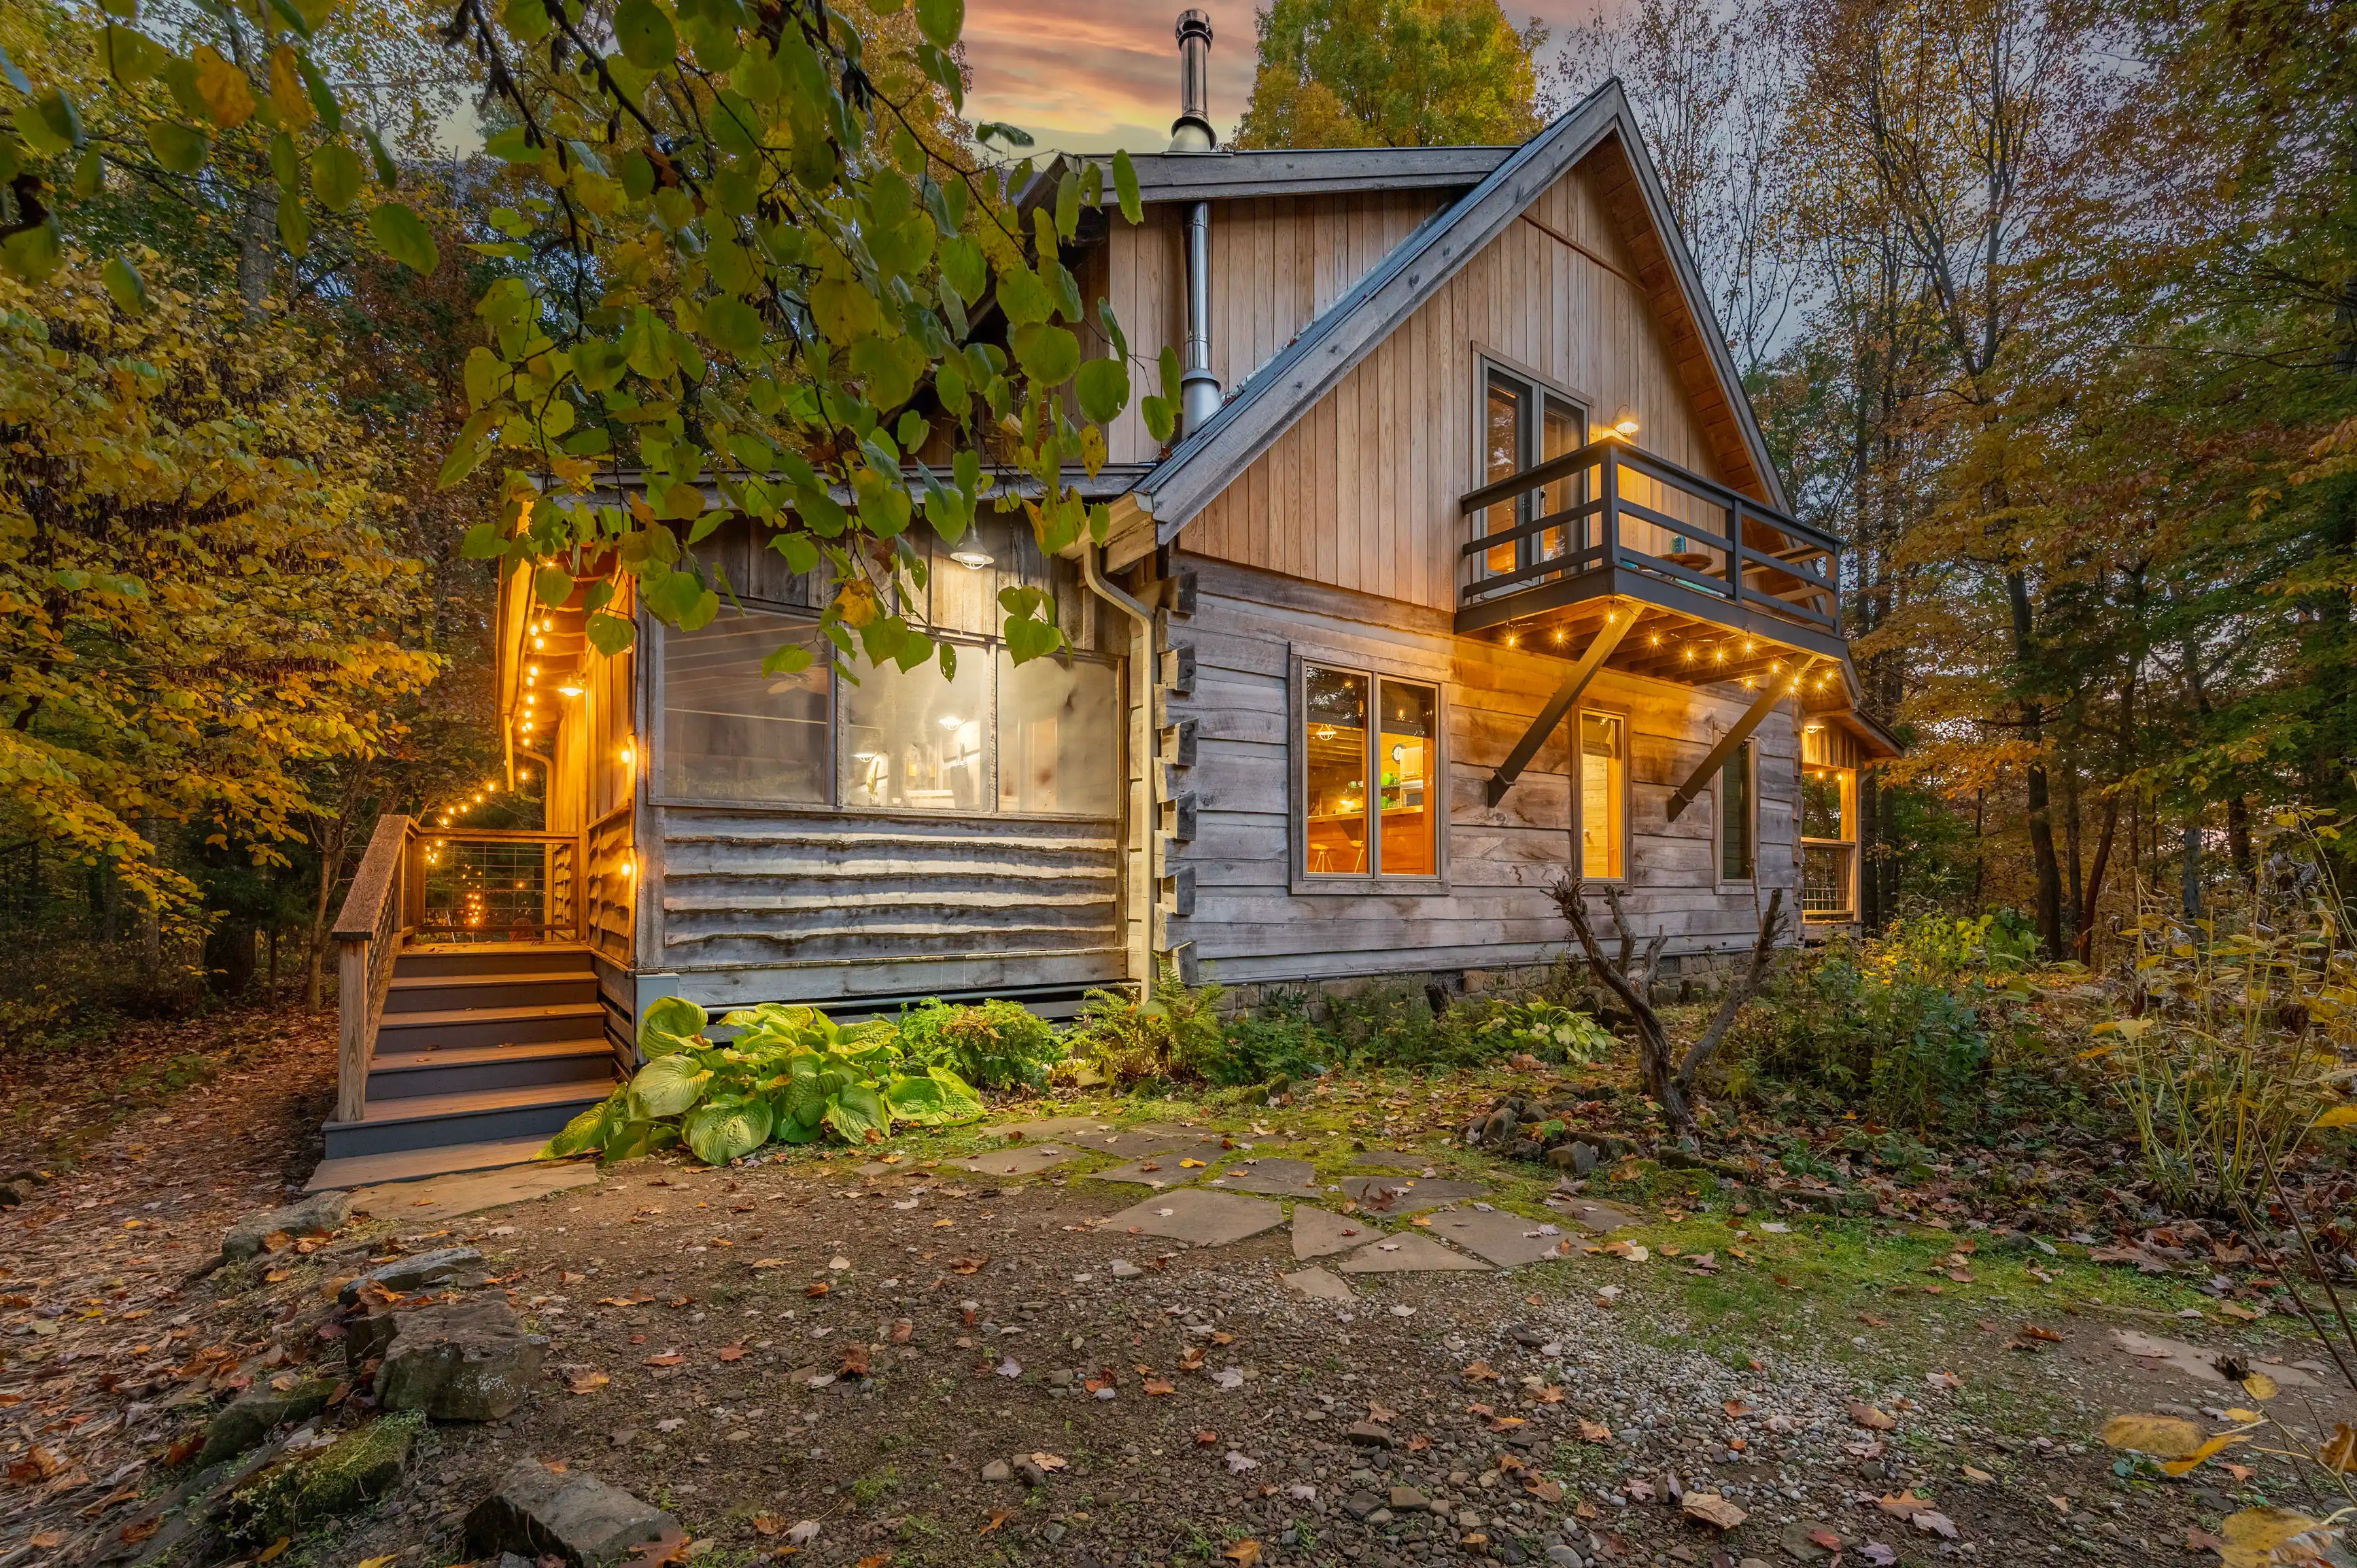 Rustic wooden cabin with illuminated porch lights, surrounded by autumn foliage at twilight.